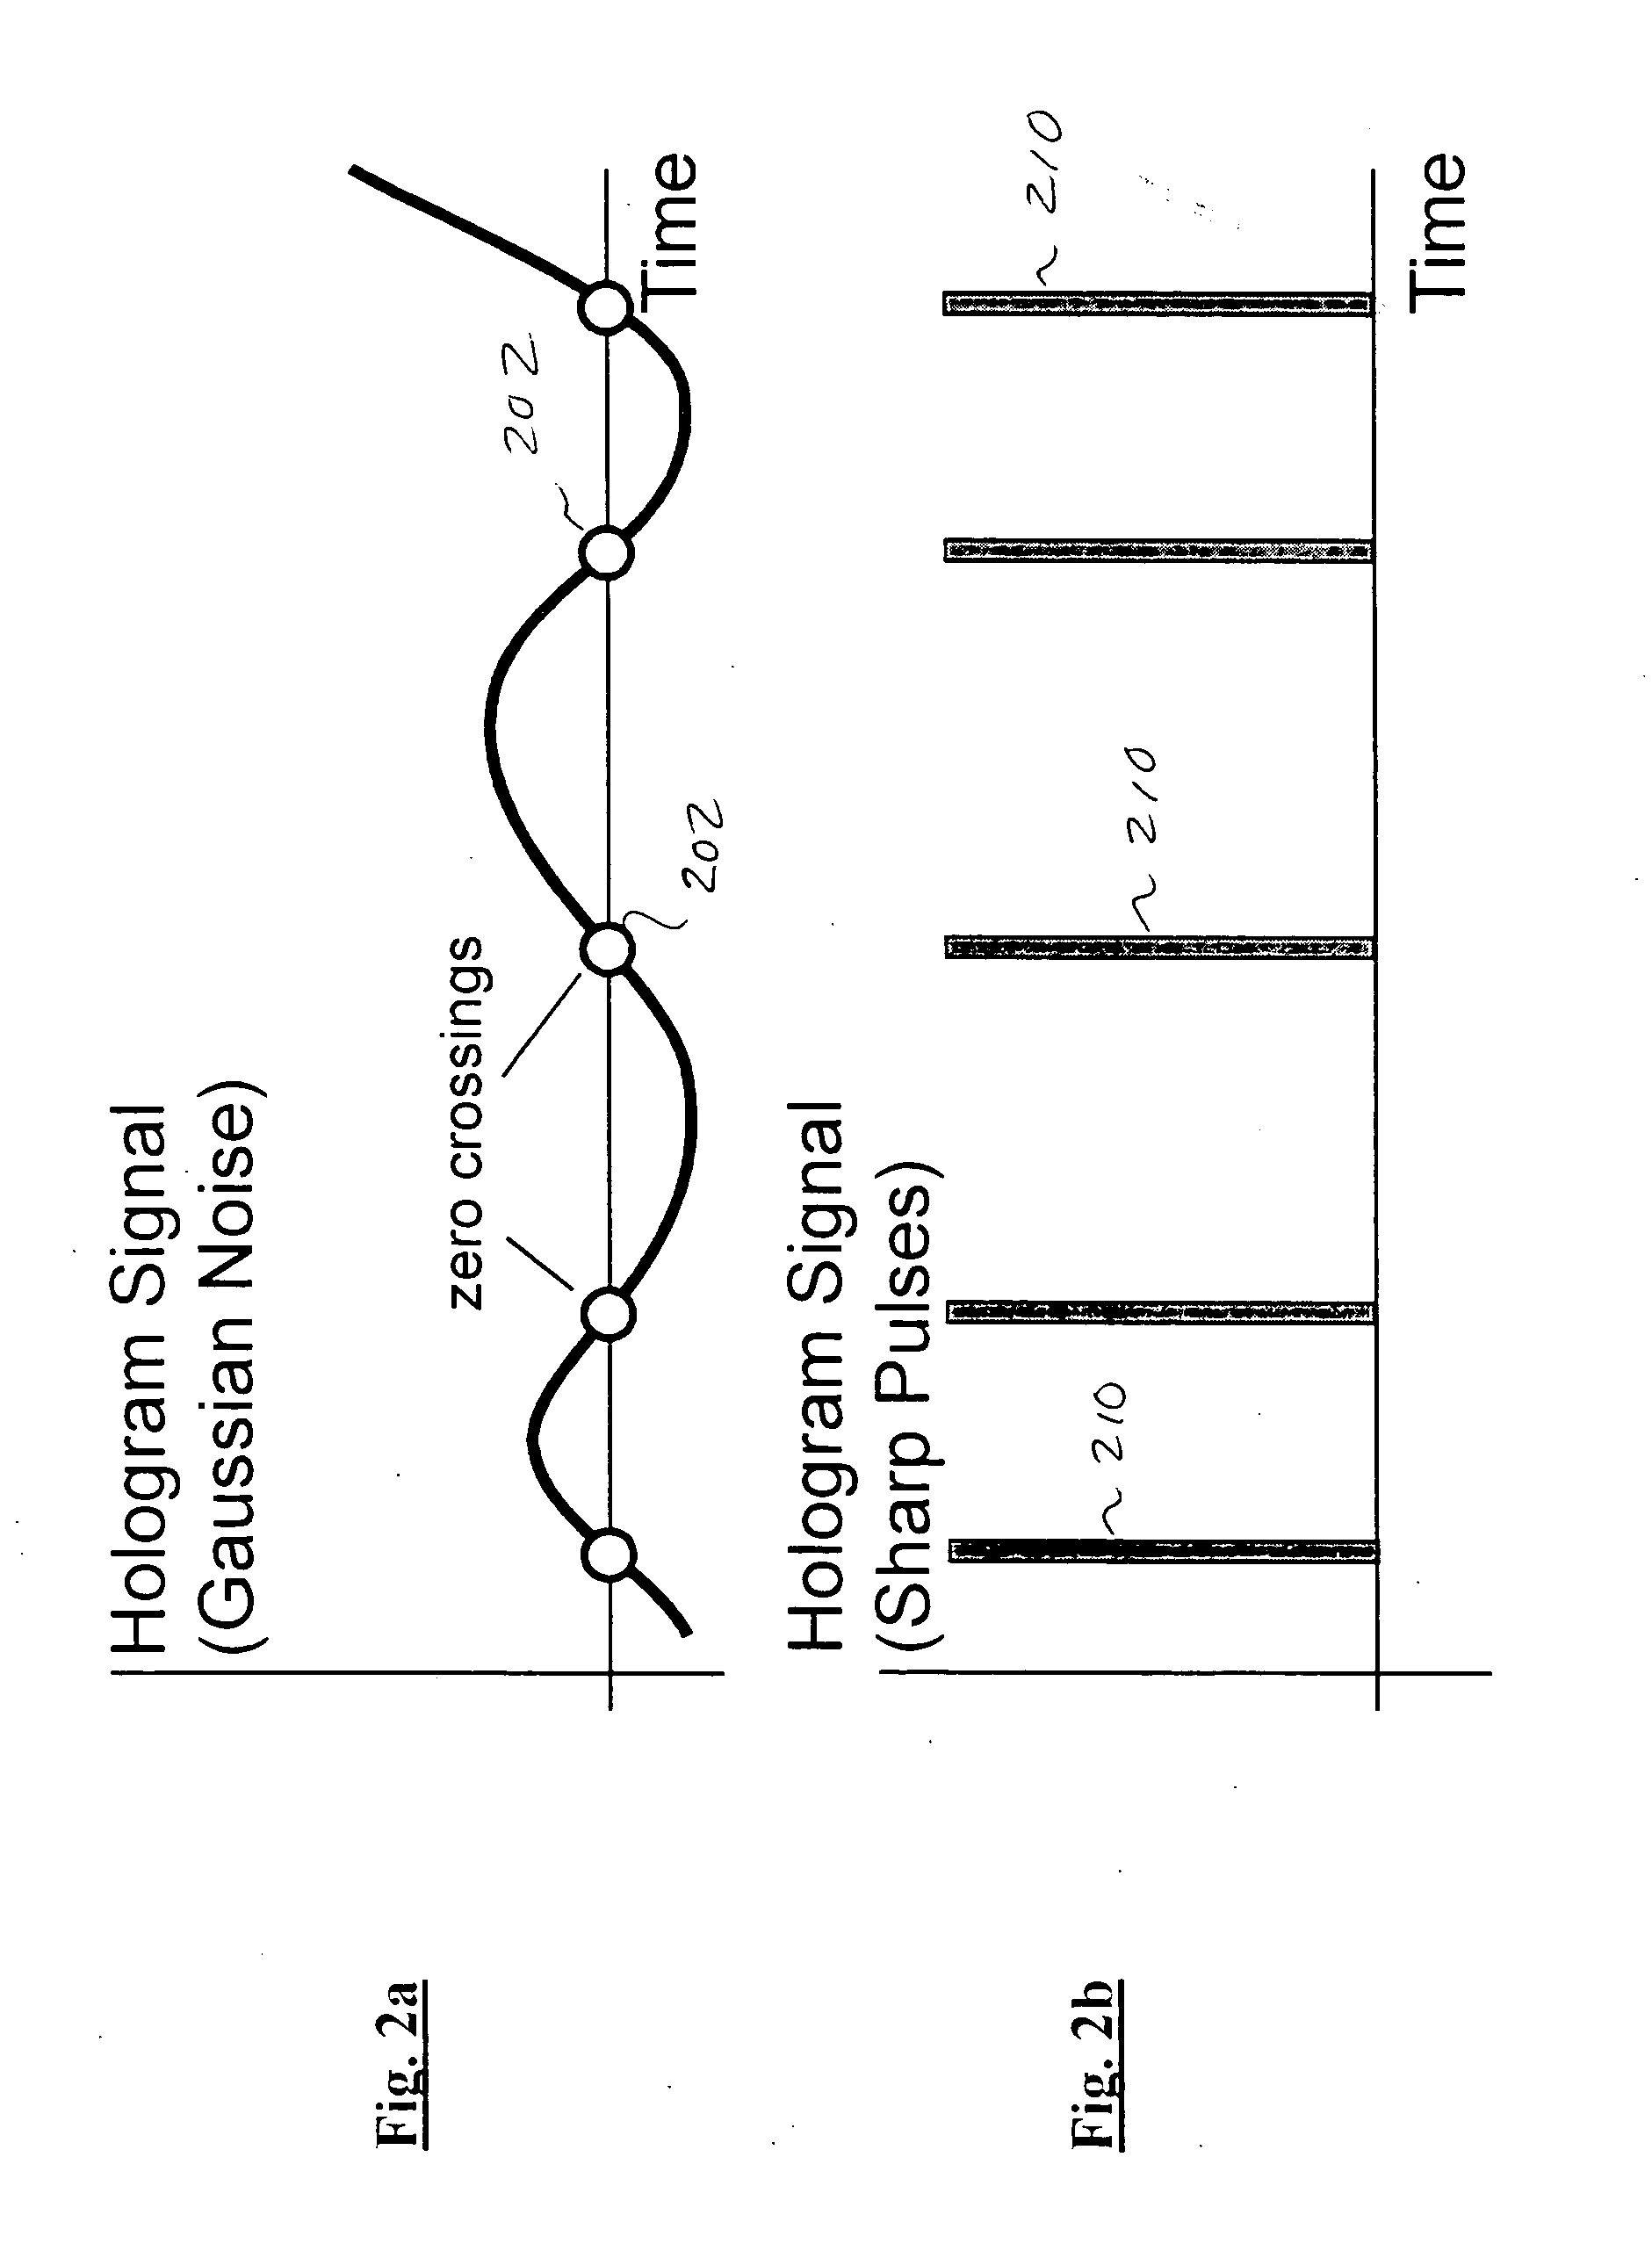 Multiple access holographic communications apparatus and methods